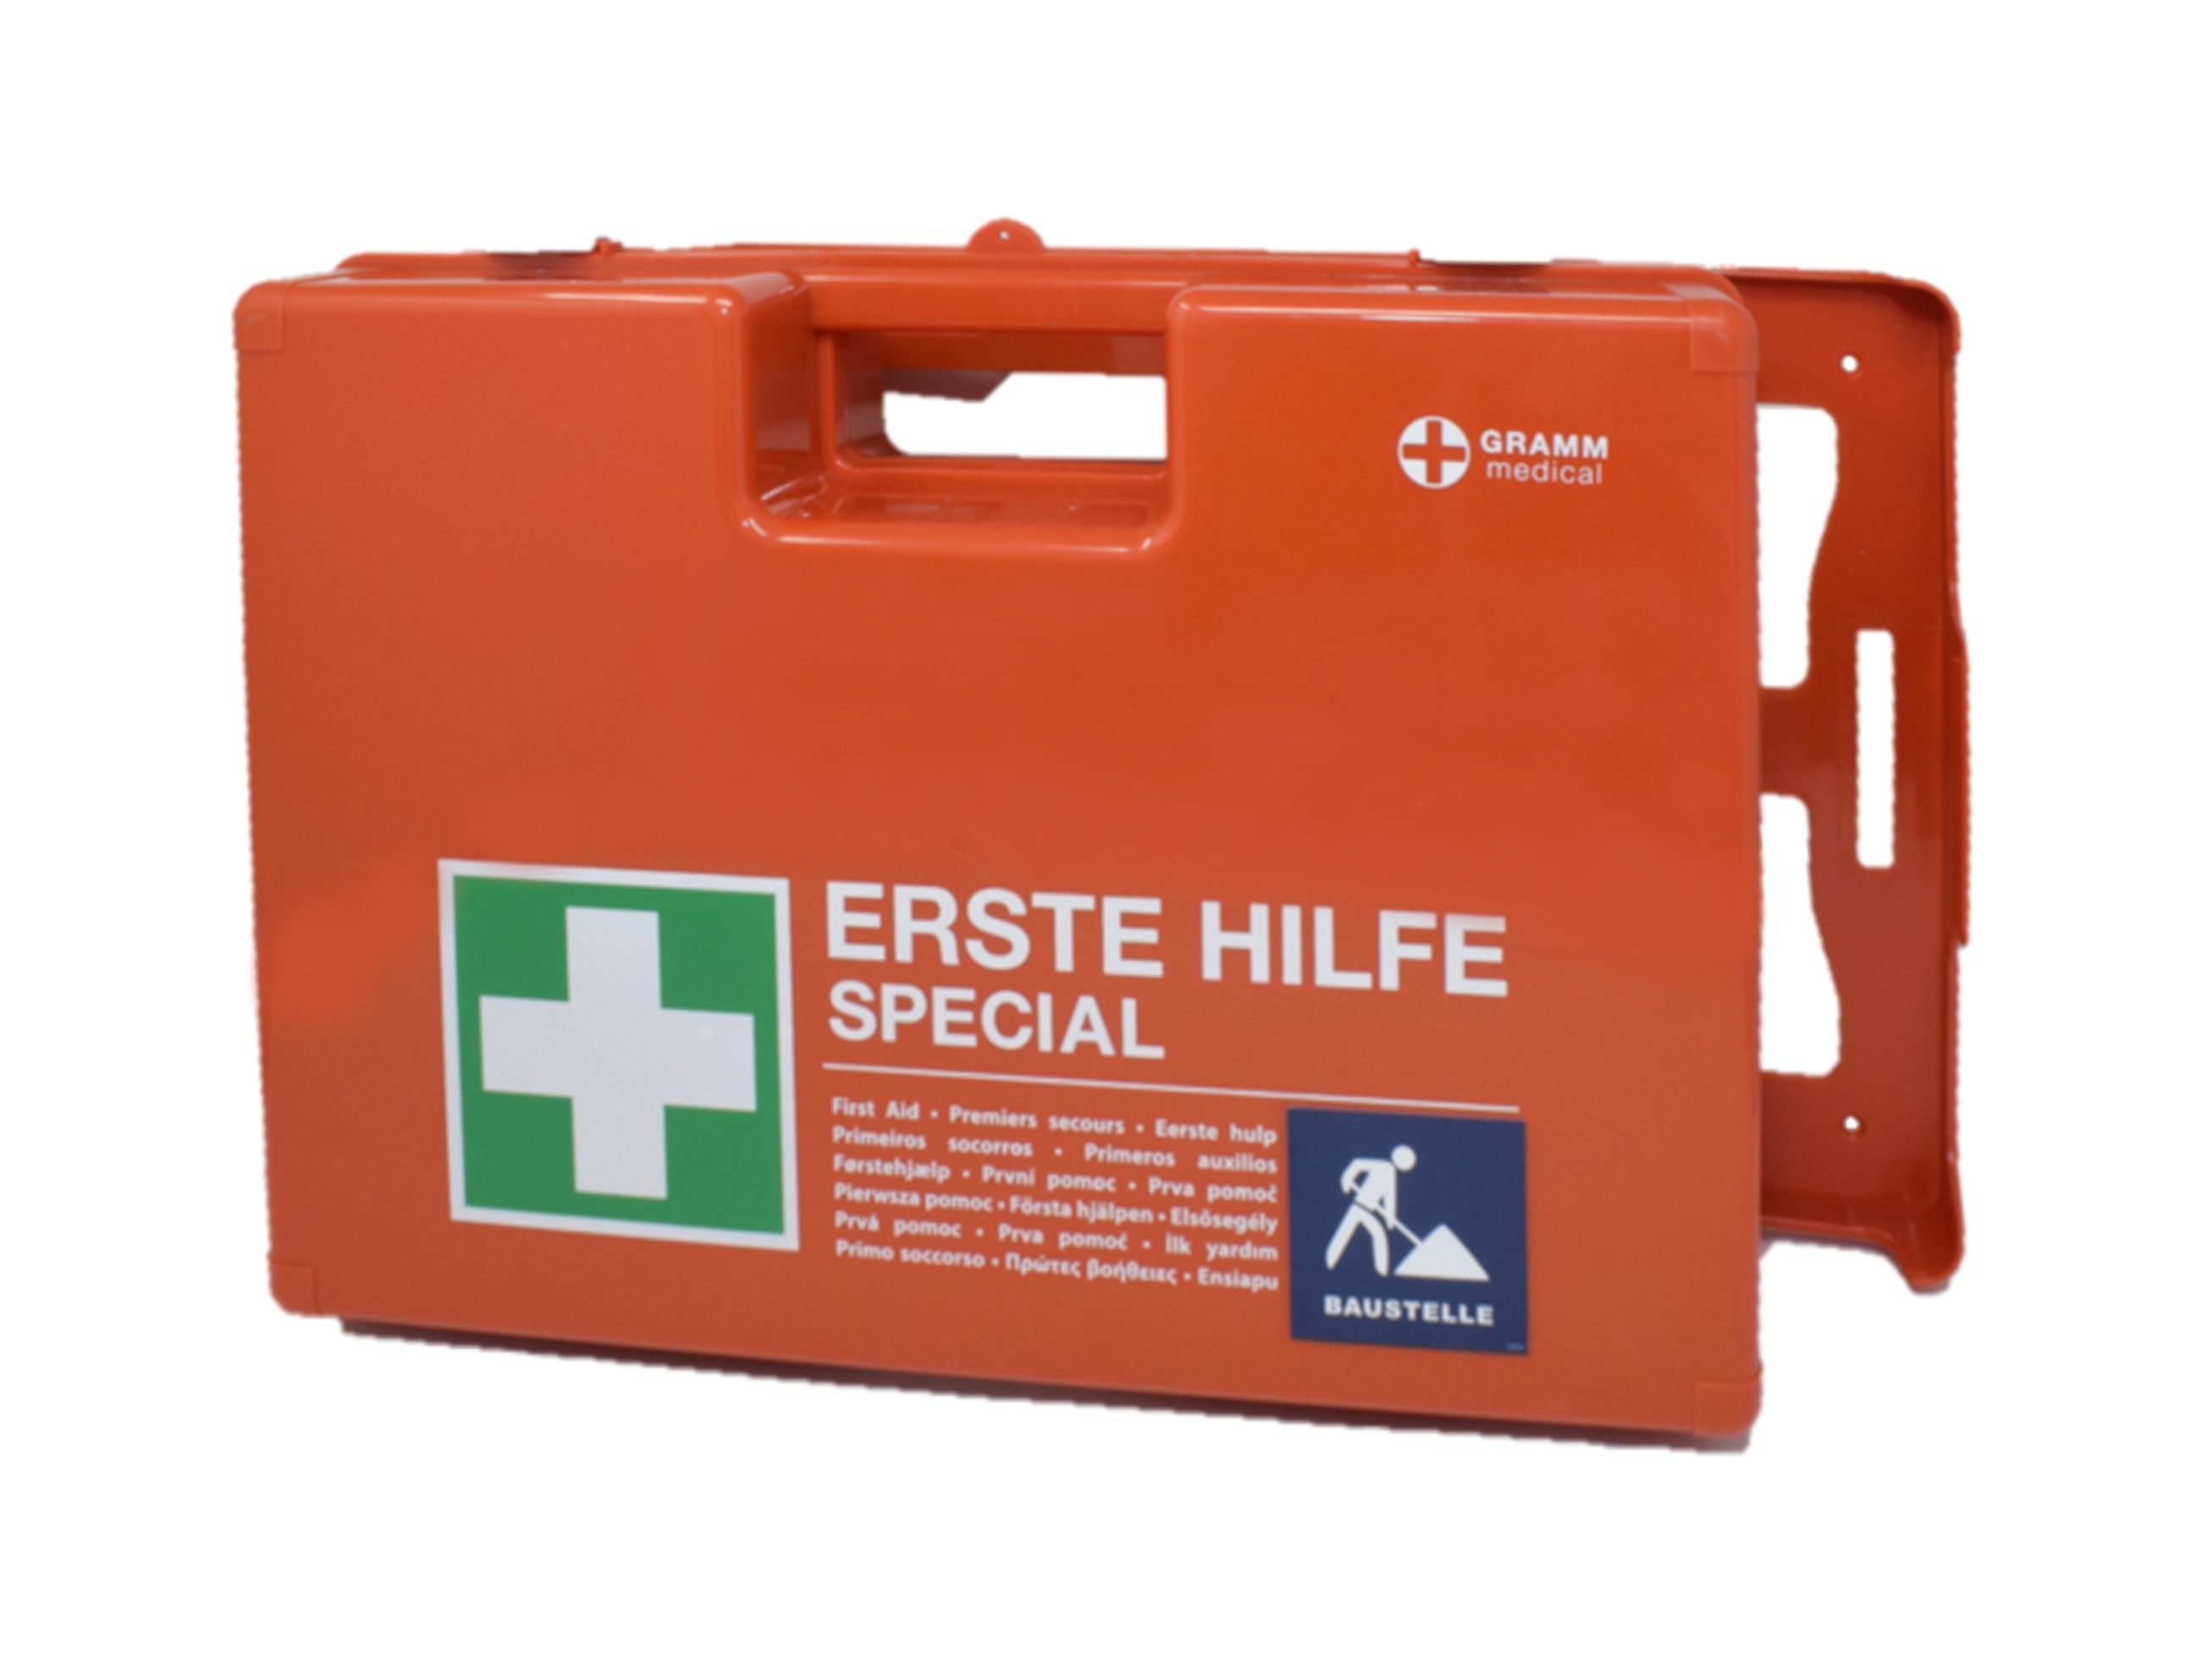 Construction site first aid box